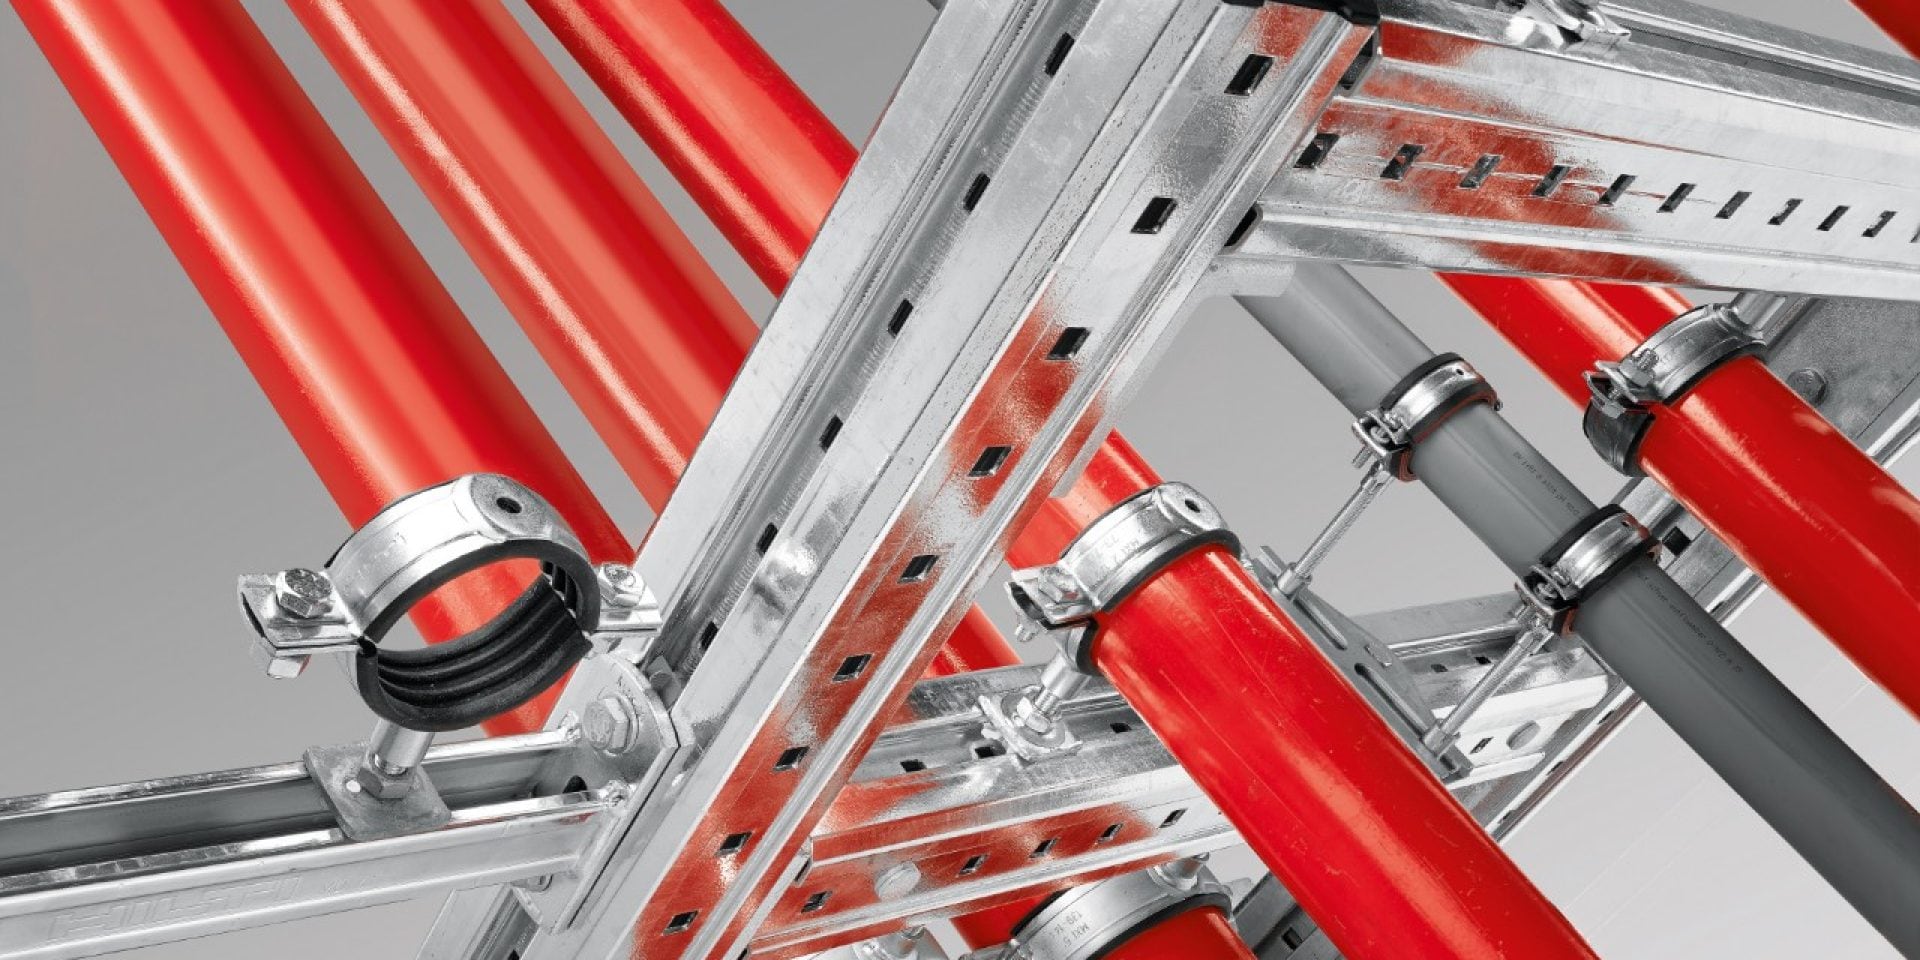  Hilti MIQ modular support system for heavy duty applications